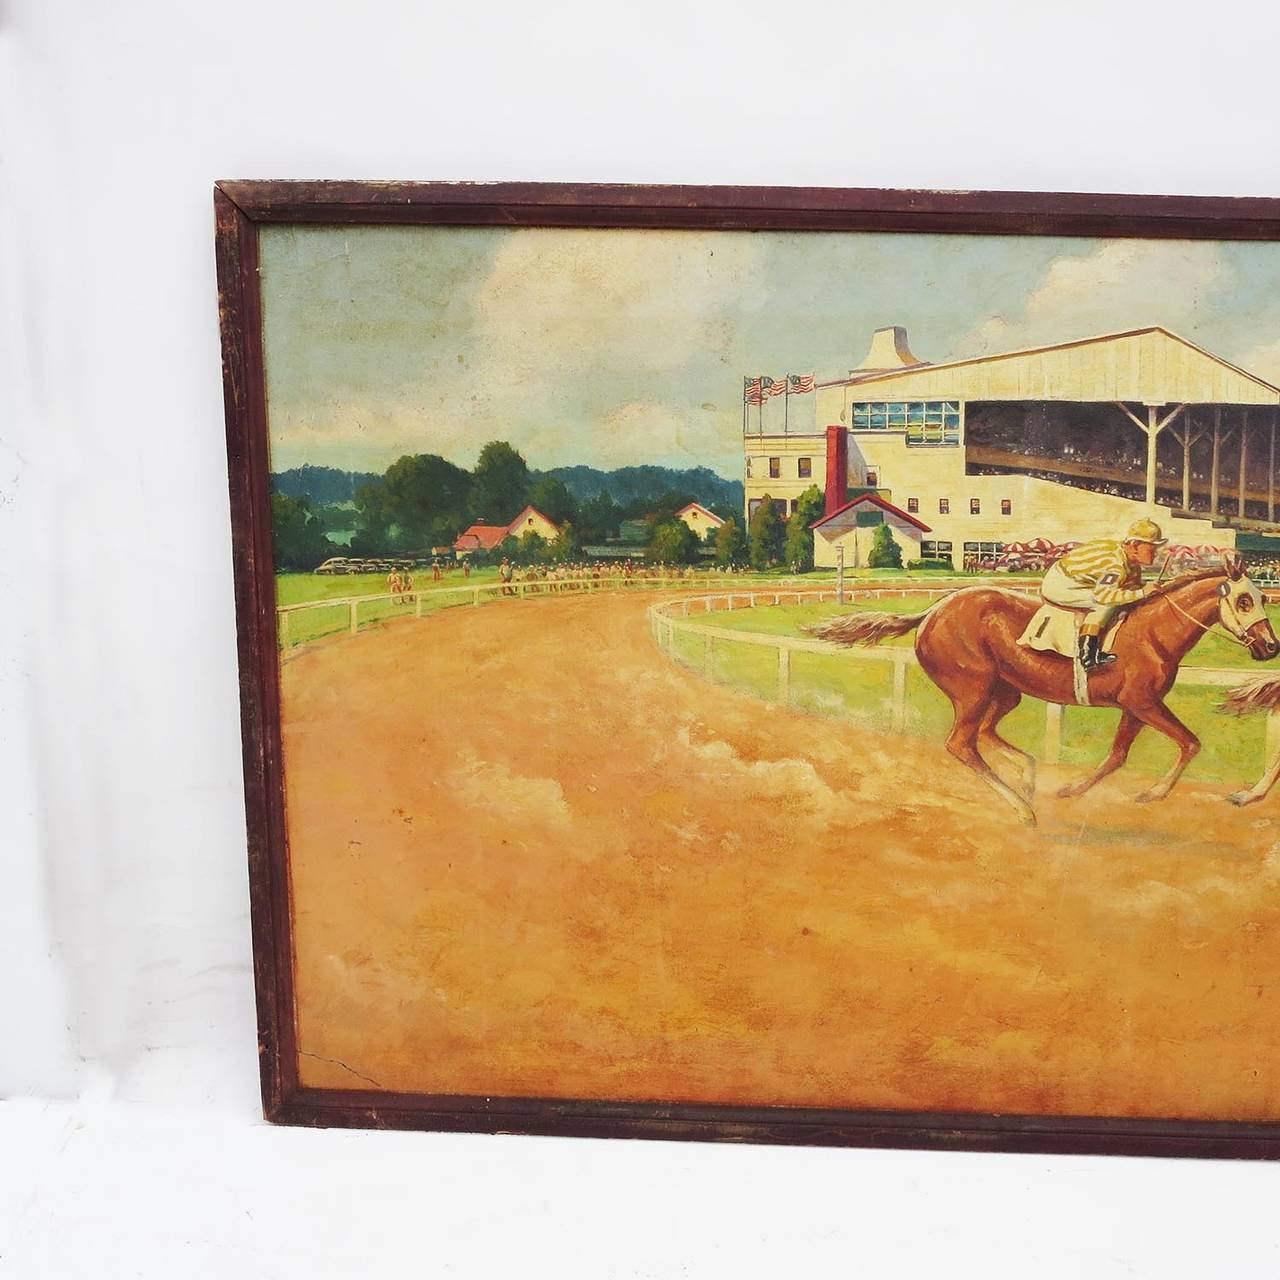 A fantastic work by American artist Anthony J. Cucchi, circa 1950. The medium is oil on board, and is in an original wooden frame. The work is beautifully executed, with overall yellowing of age. A great decorative painting for any interior setting.